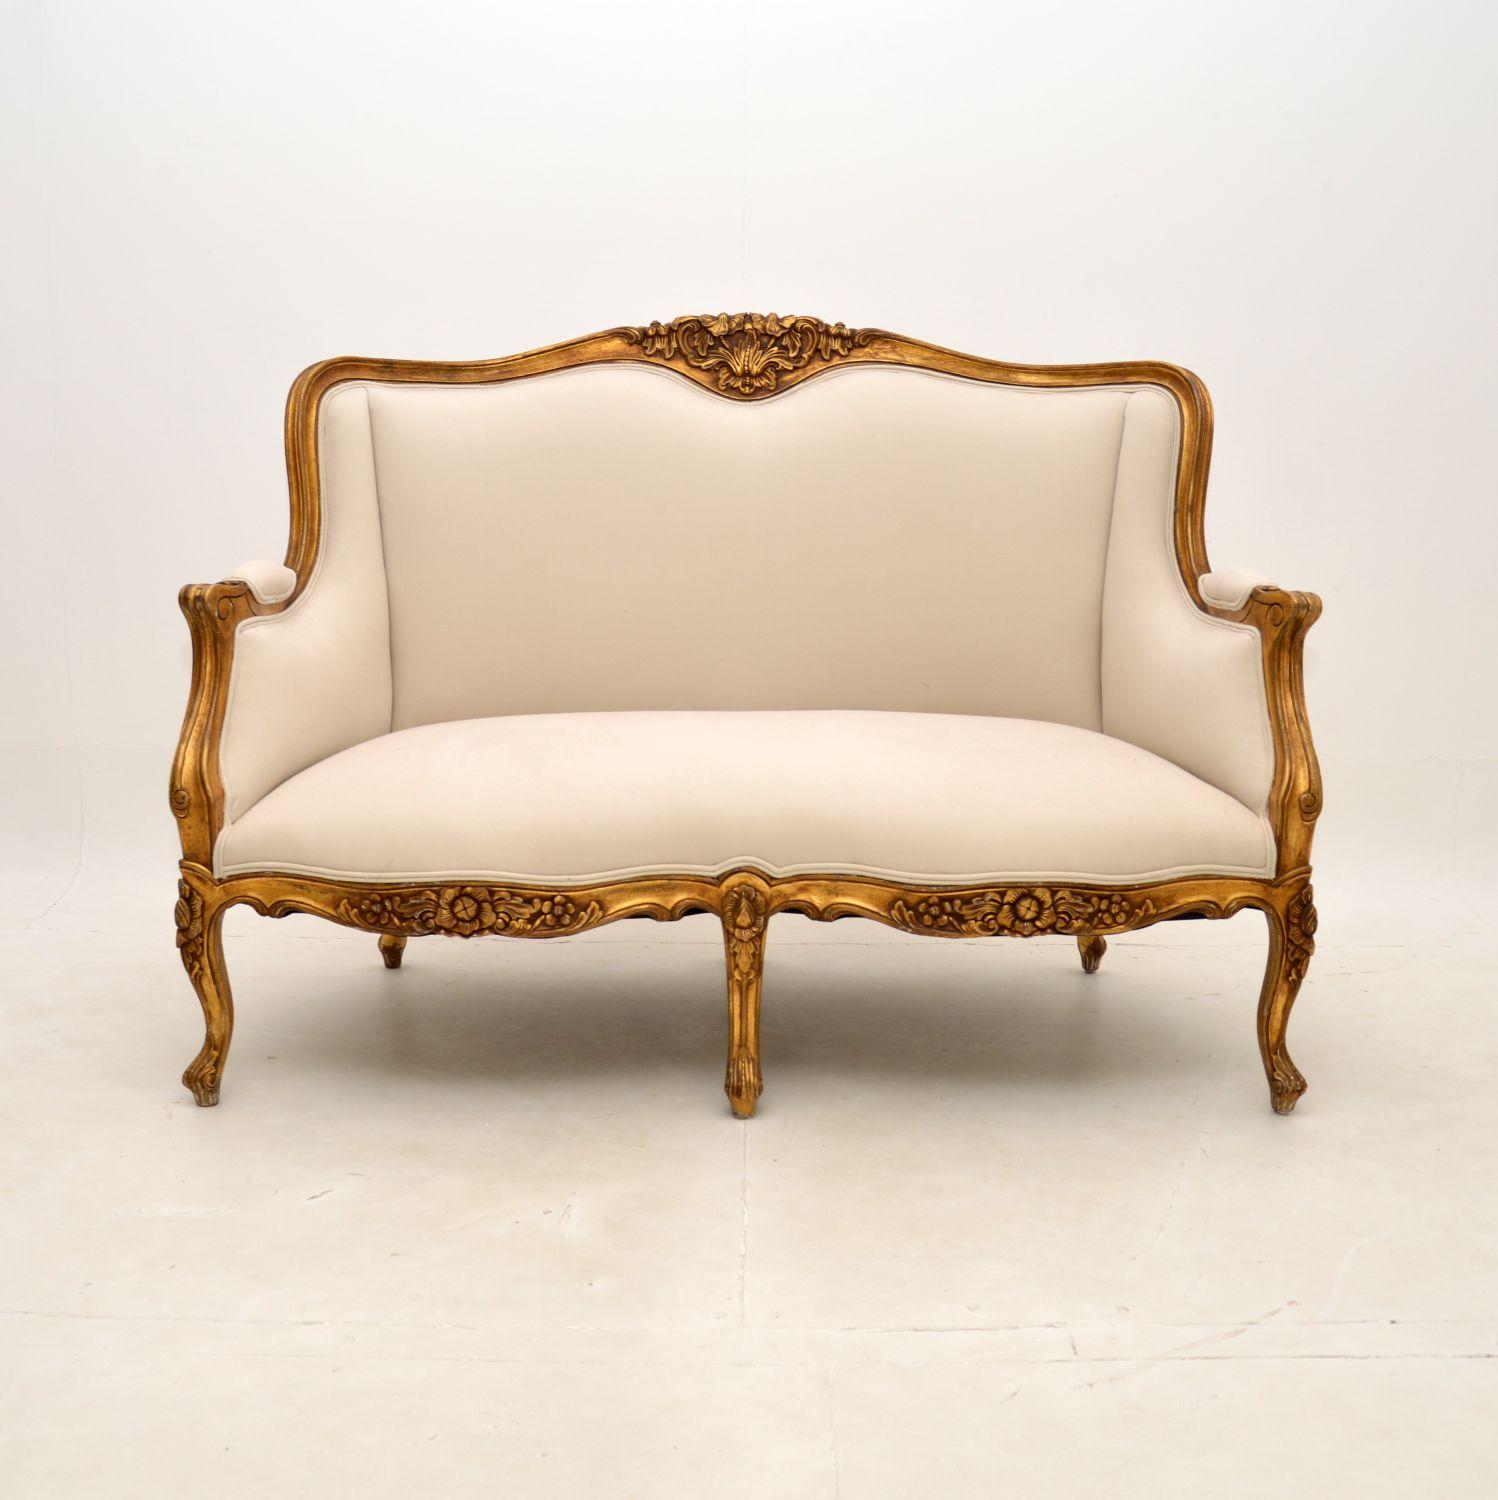 A stunning and top quality antique French Louis style gilt wood sofa, dating from around the 1930’s period.

It is beautifully made, with a gorgeous shape and beautiful carving. The gilt wood frame has some minor wear and distressing to the gilding,